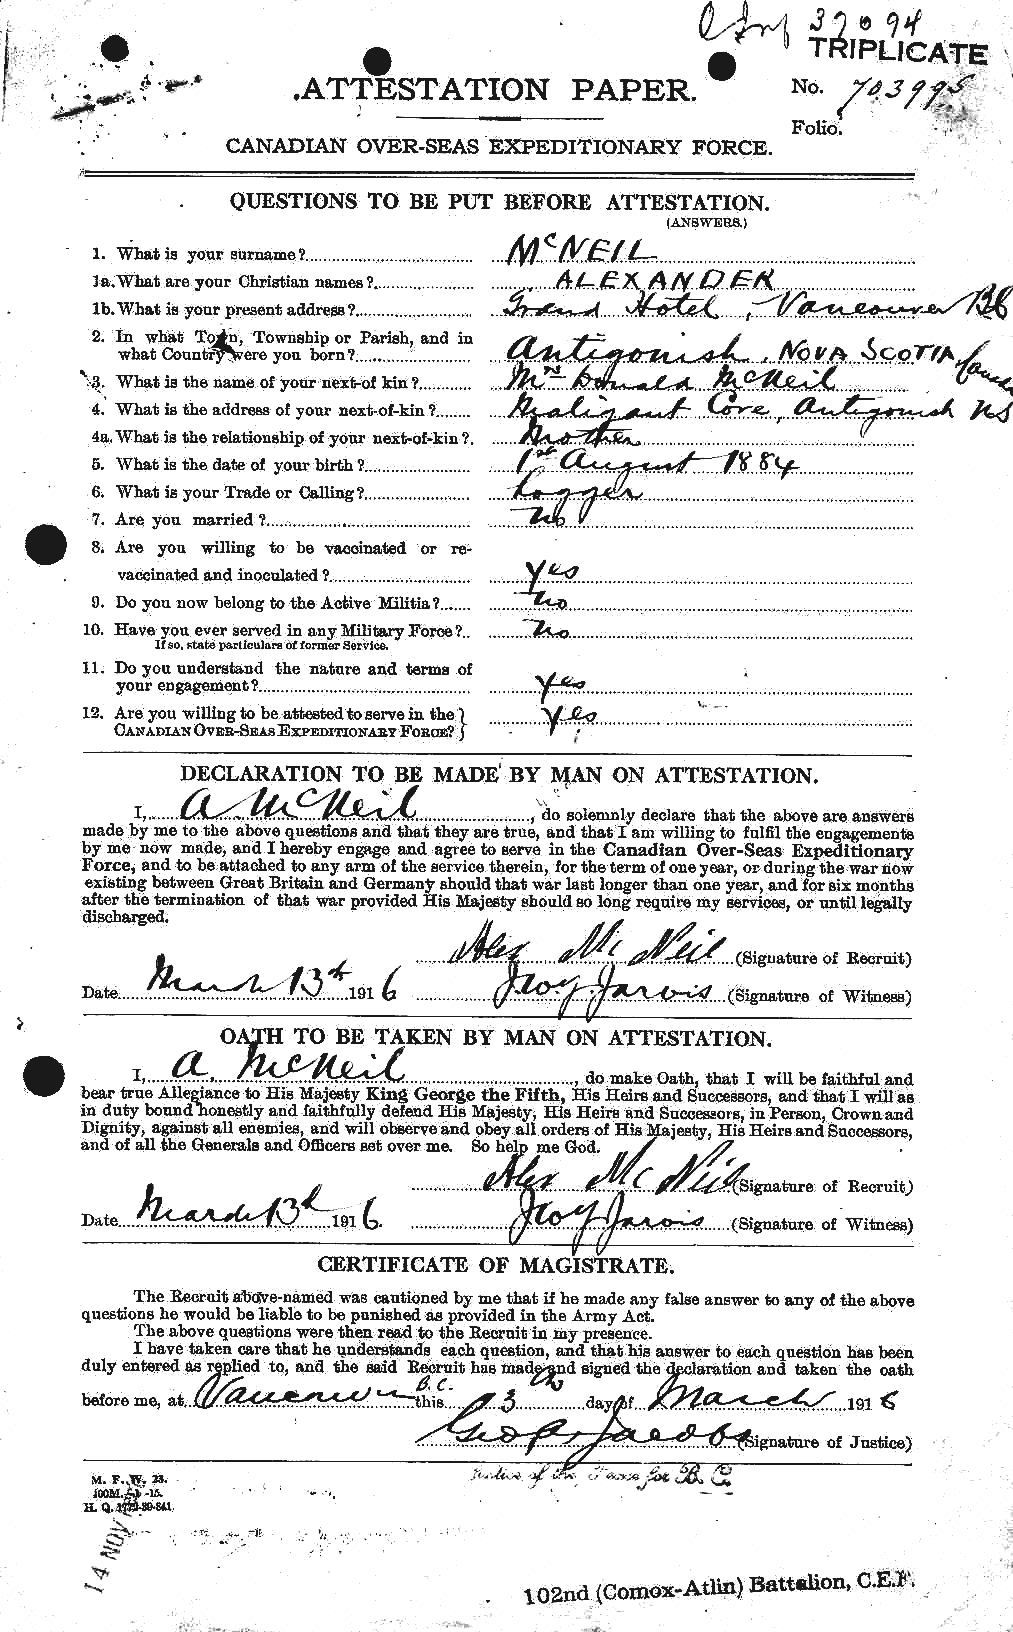 Personnel Records of the First World War - CEF 541694a